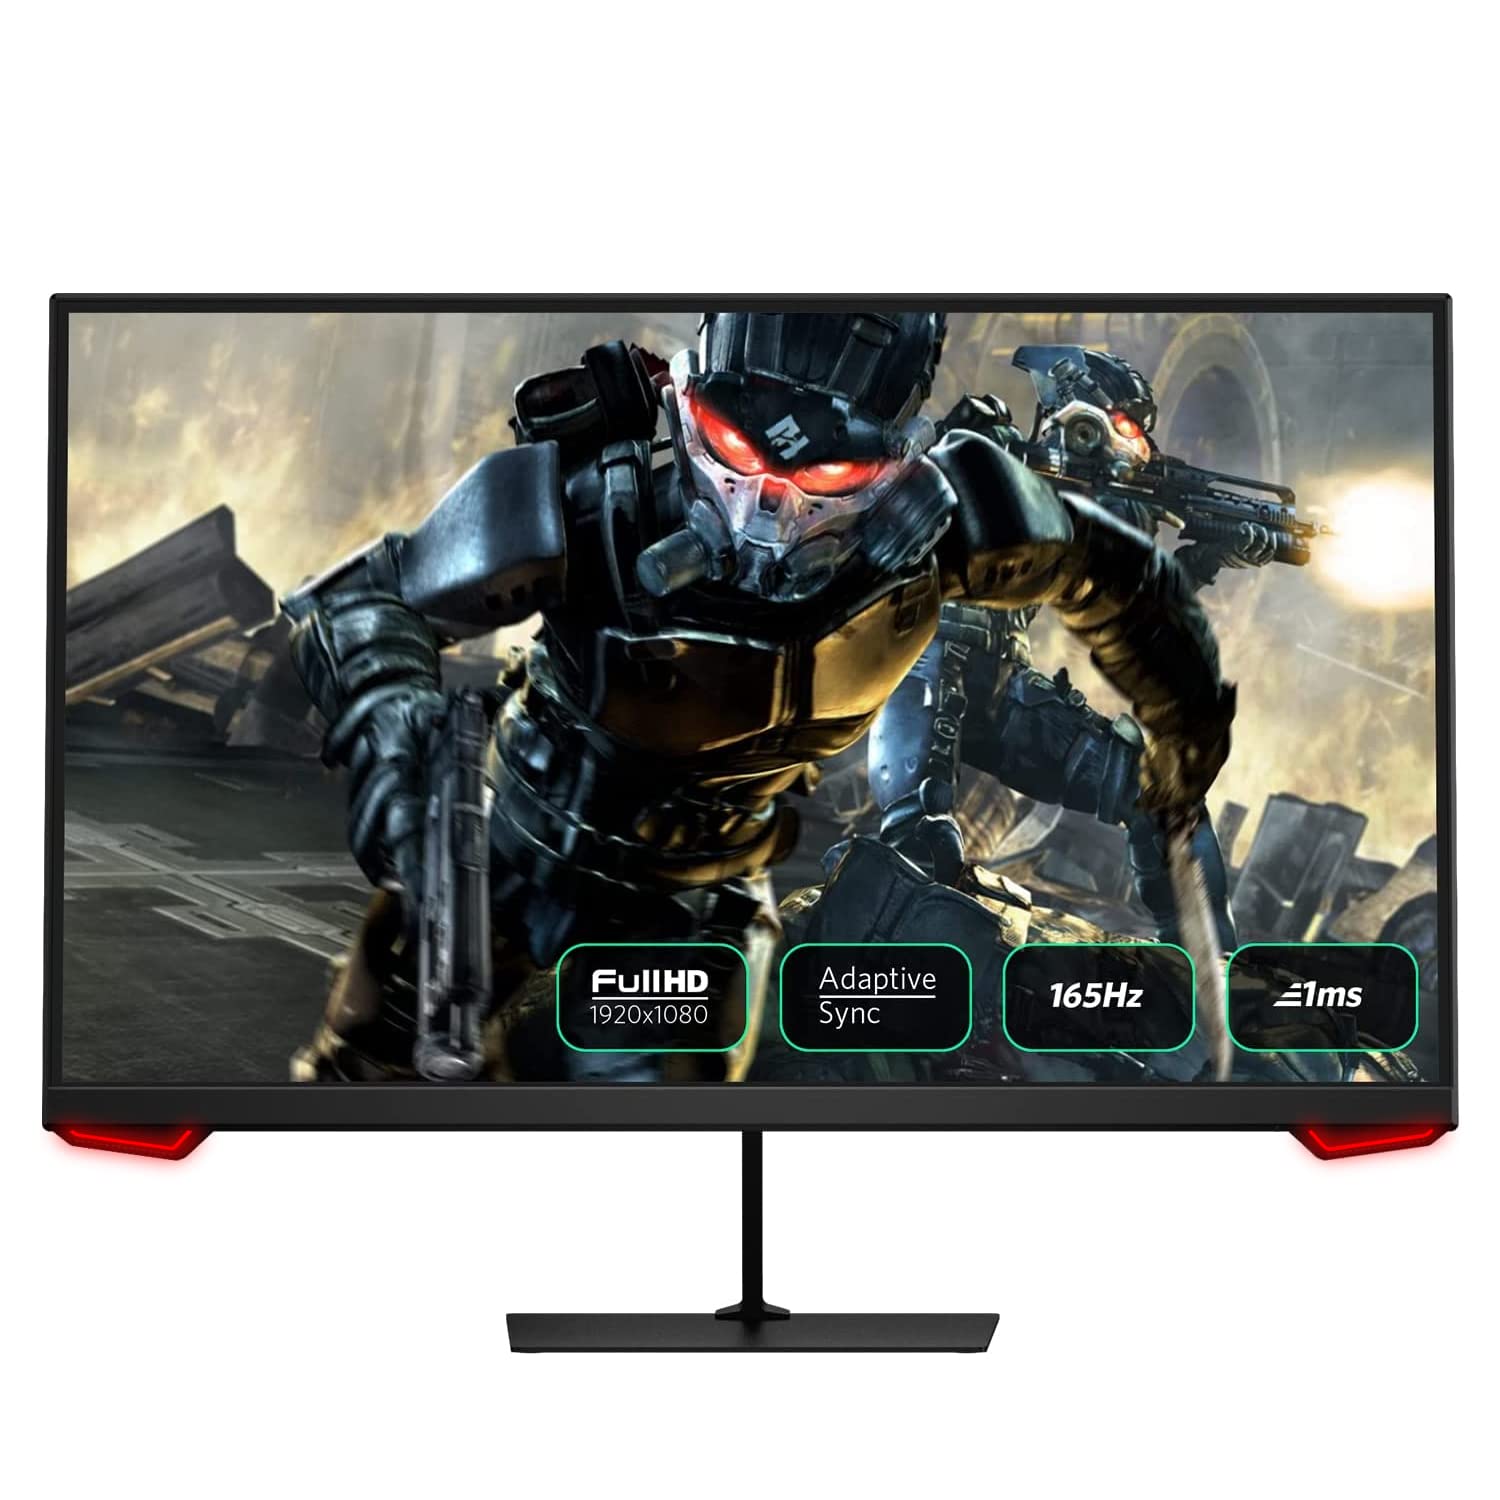 Fiodio 24” Gaming Monitor, with 165Hz Refresh Rate, 1920 * 1080P Full HD, Adaptive Sync, MPRT 1ms, HDMI and DP Inputs (DP Cable Included), Flat, Black (24H2G)